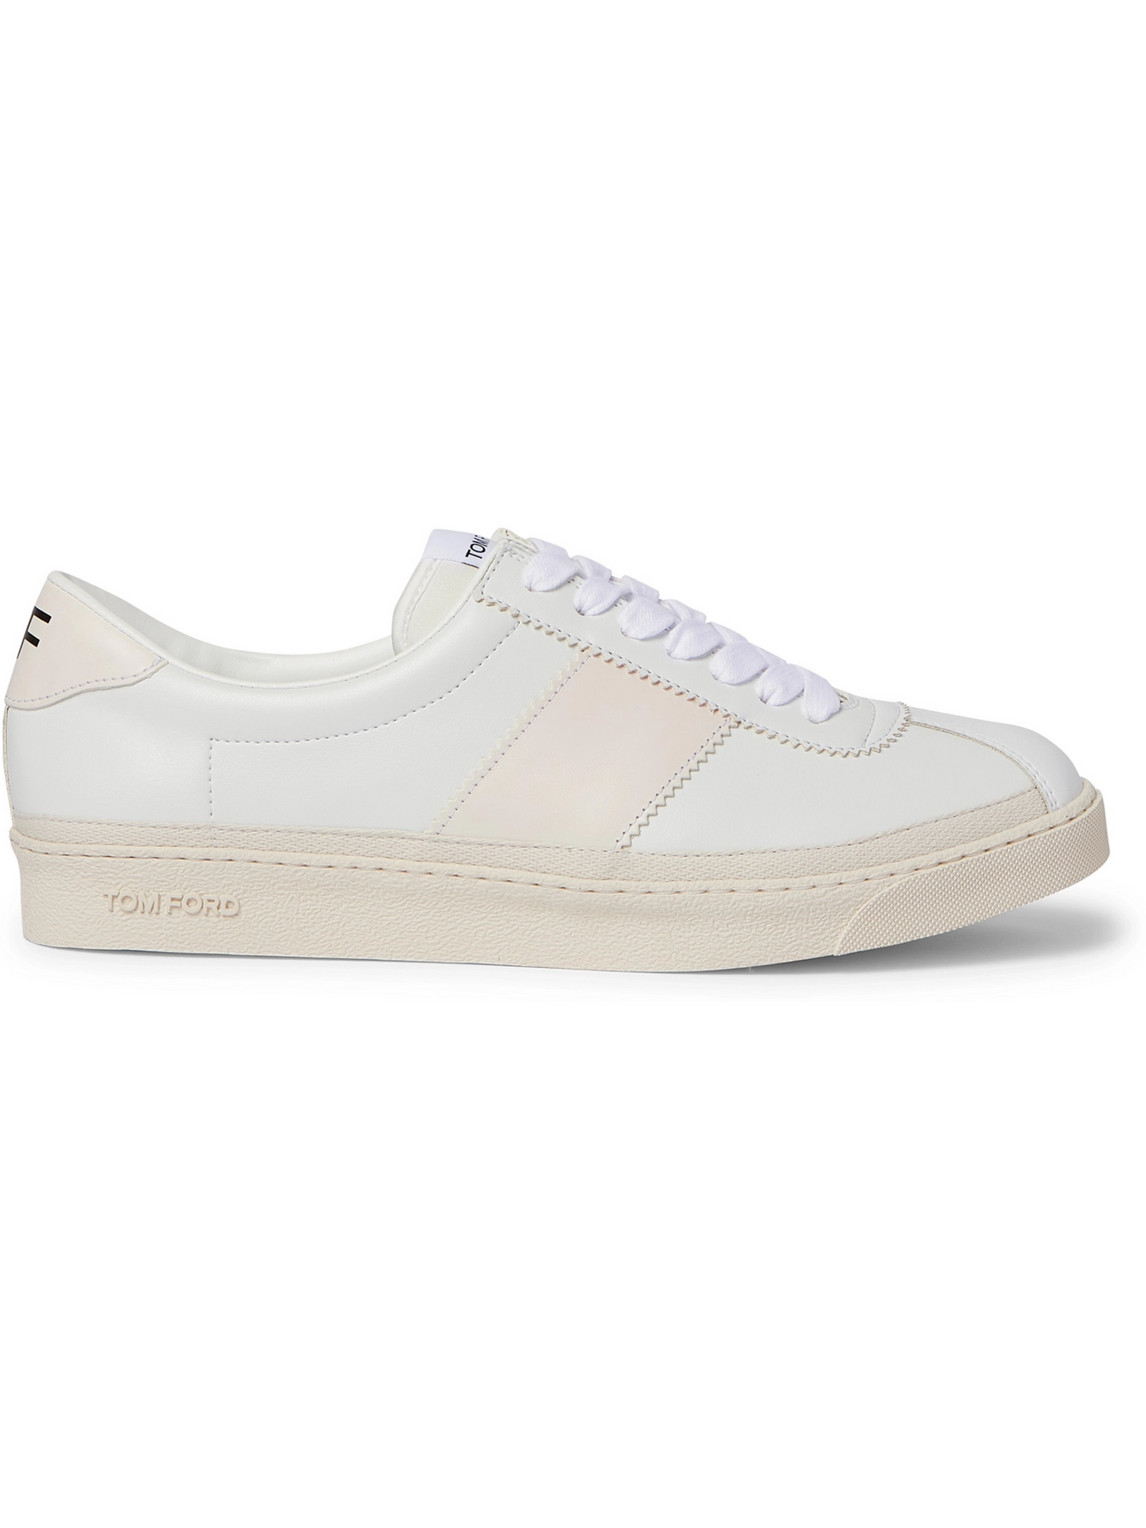 Bannister Panelled Faux Leather Sneakers